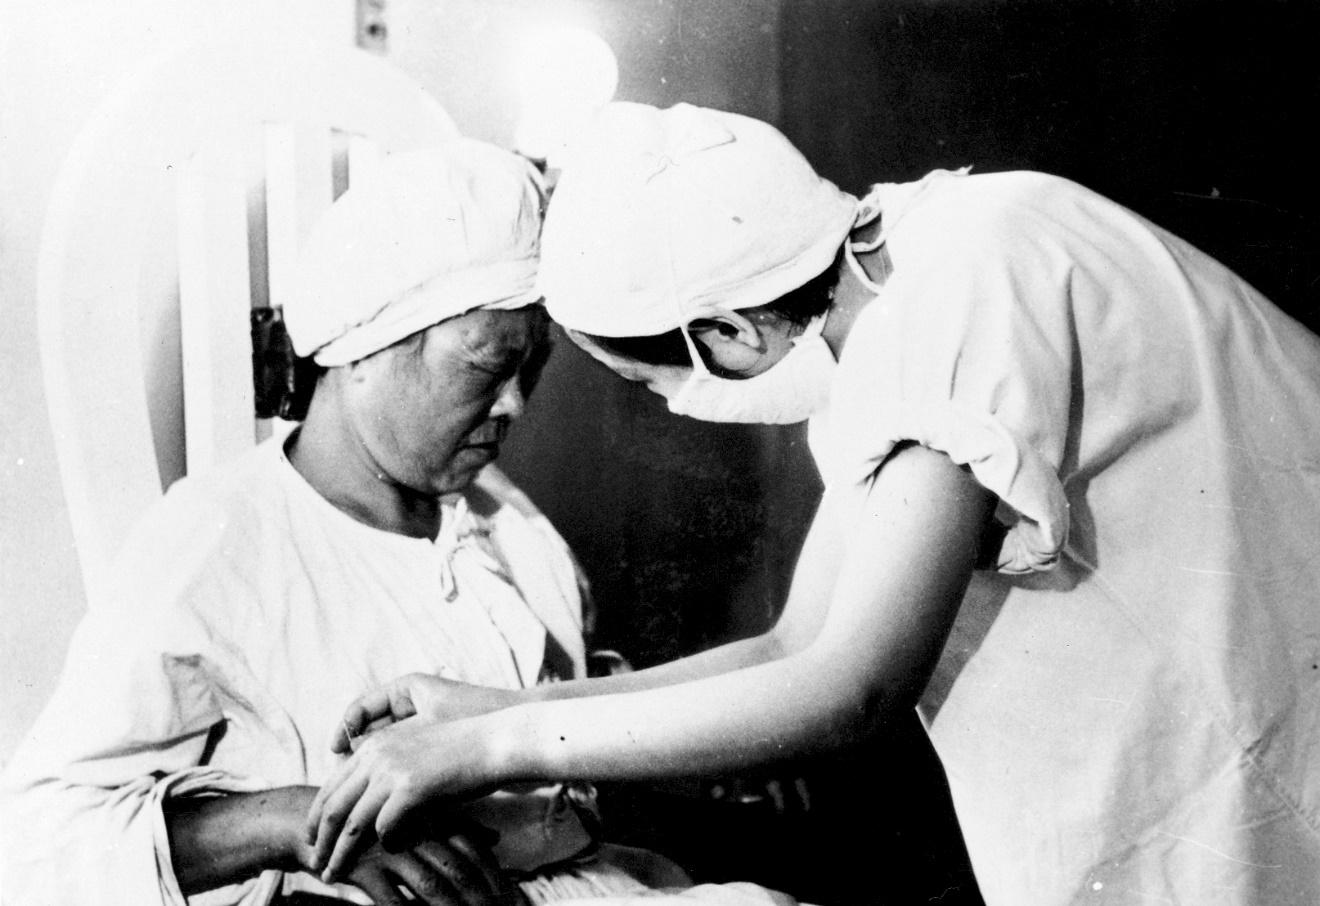 First case of acupunctura anesthesia surgery in China in 1958)